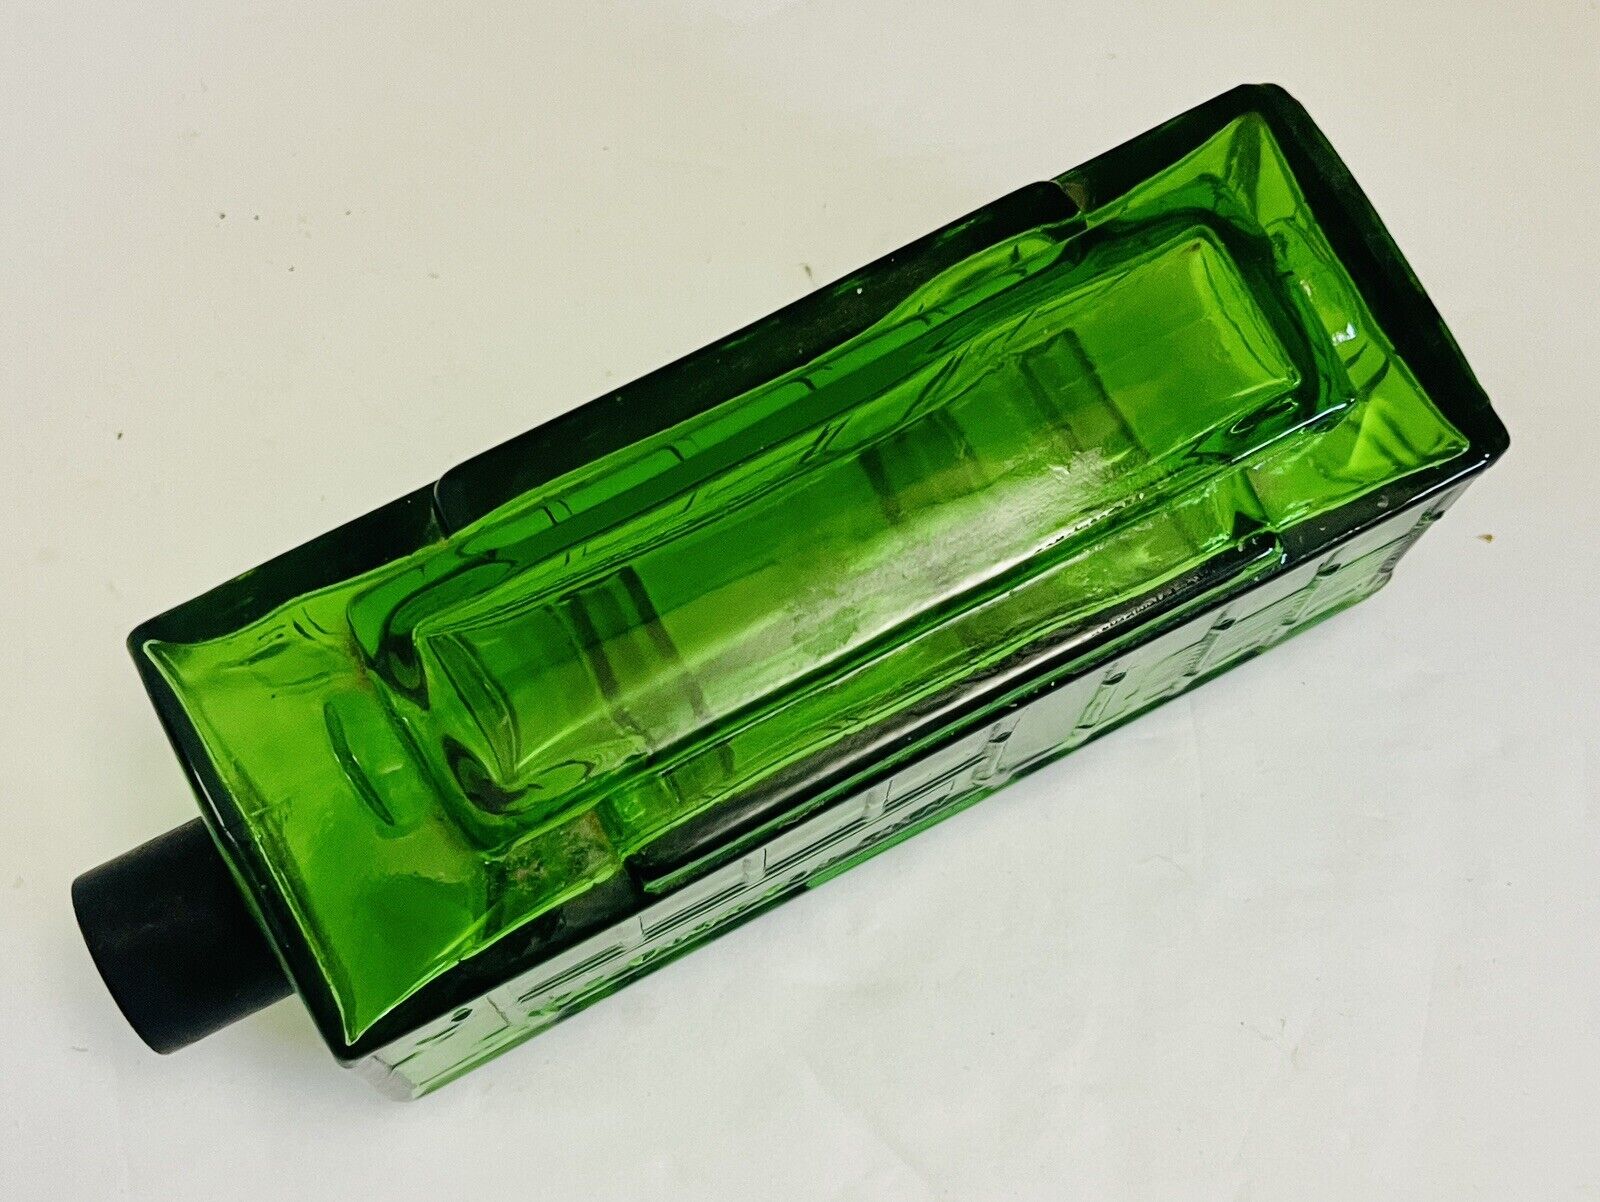 Vintage Avon Cable Car Decanter Green Glass After Shave Lotion Bottle Used